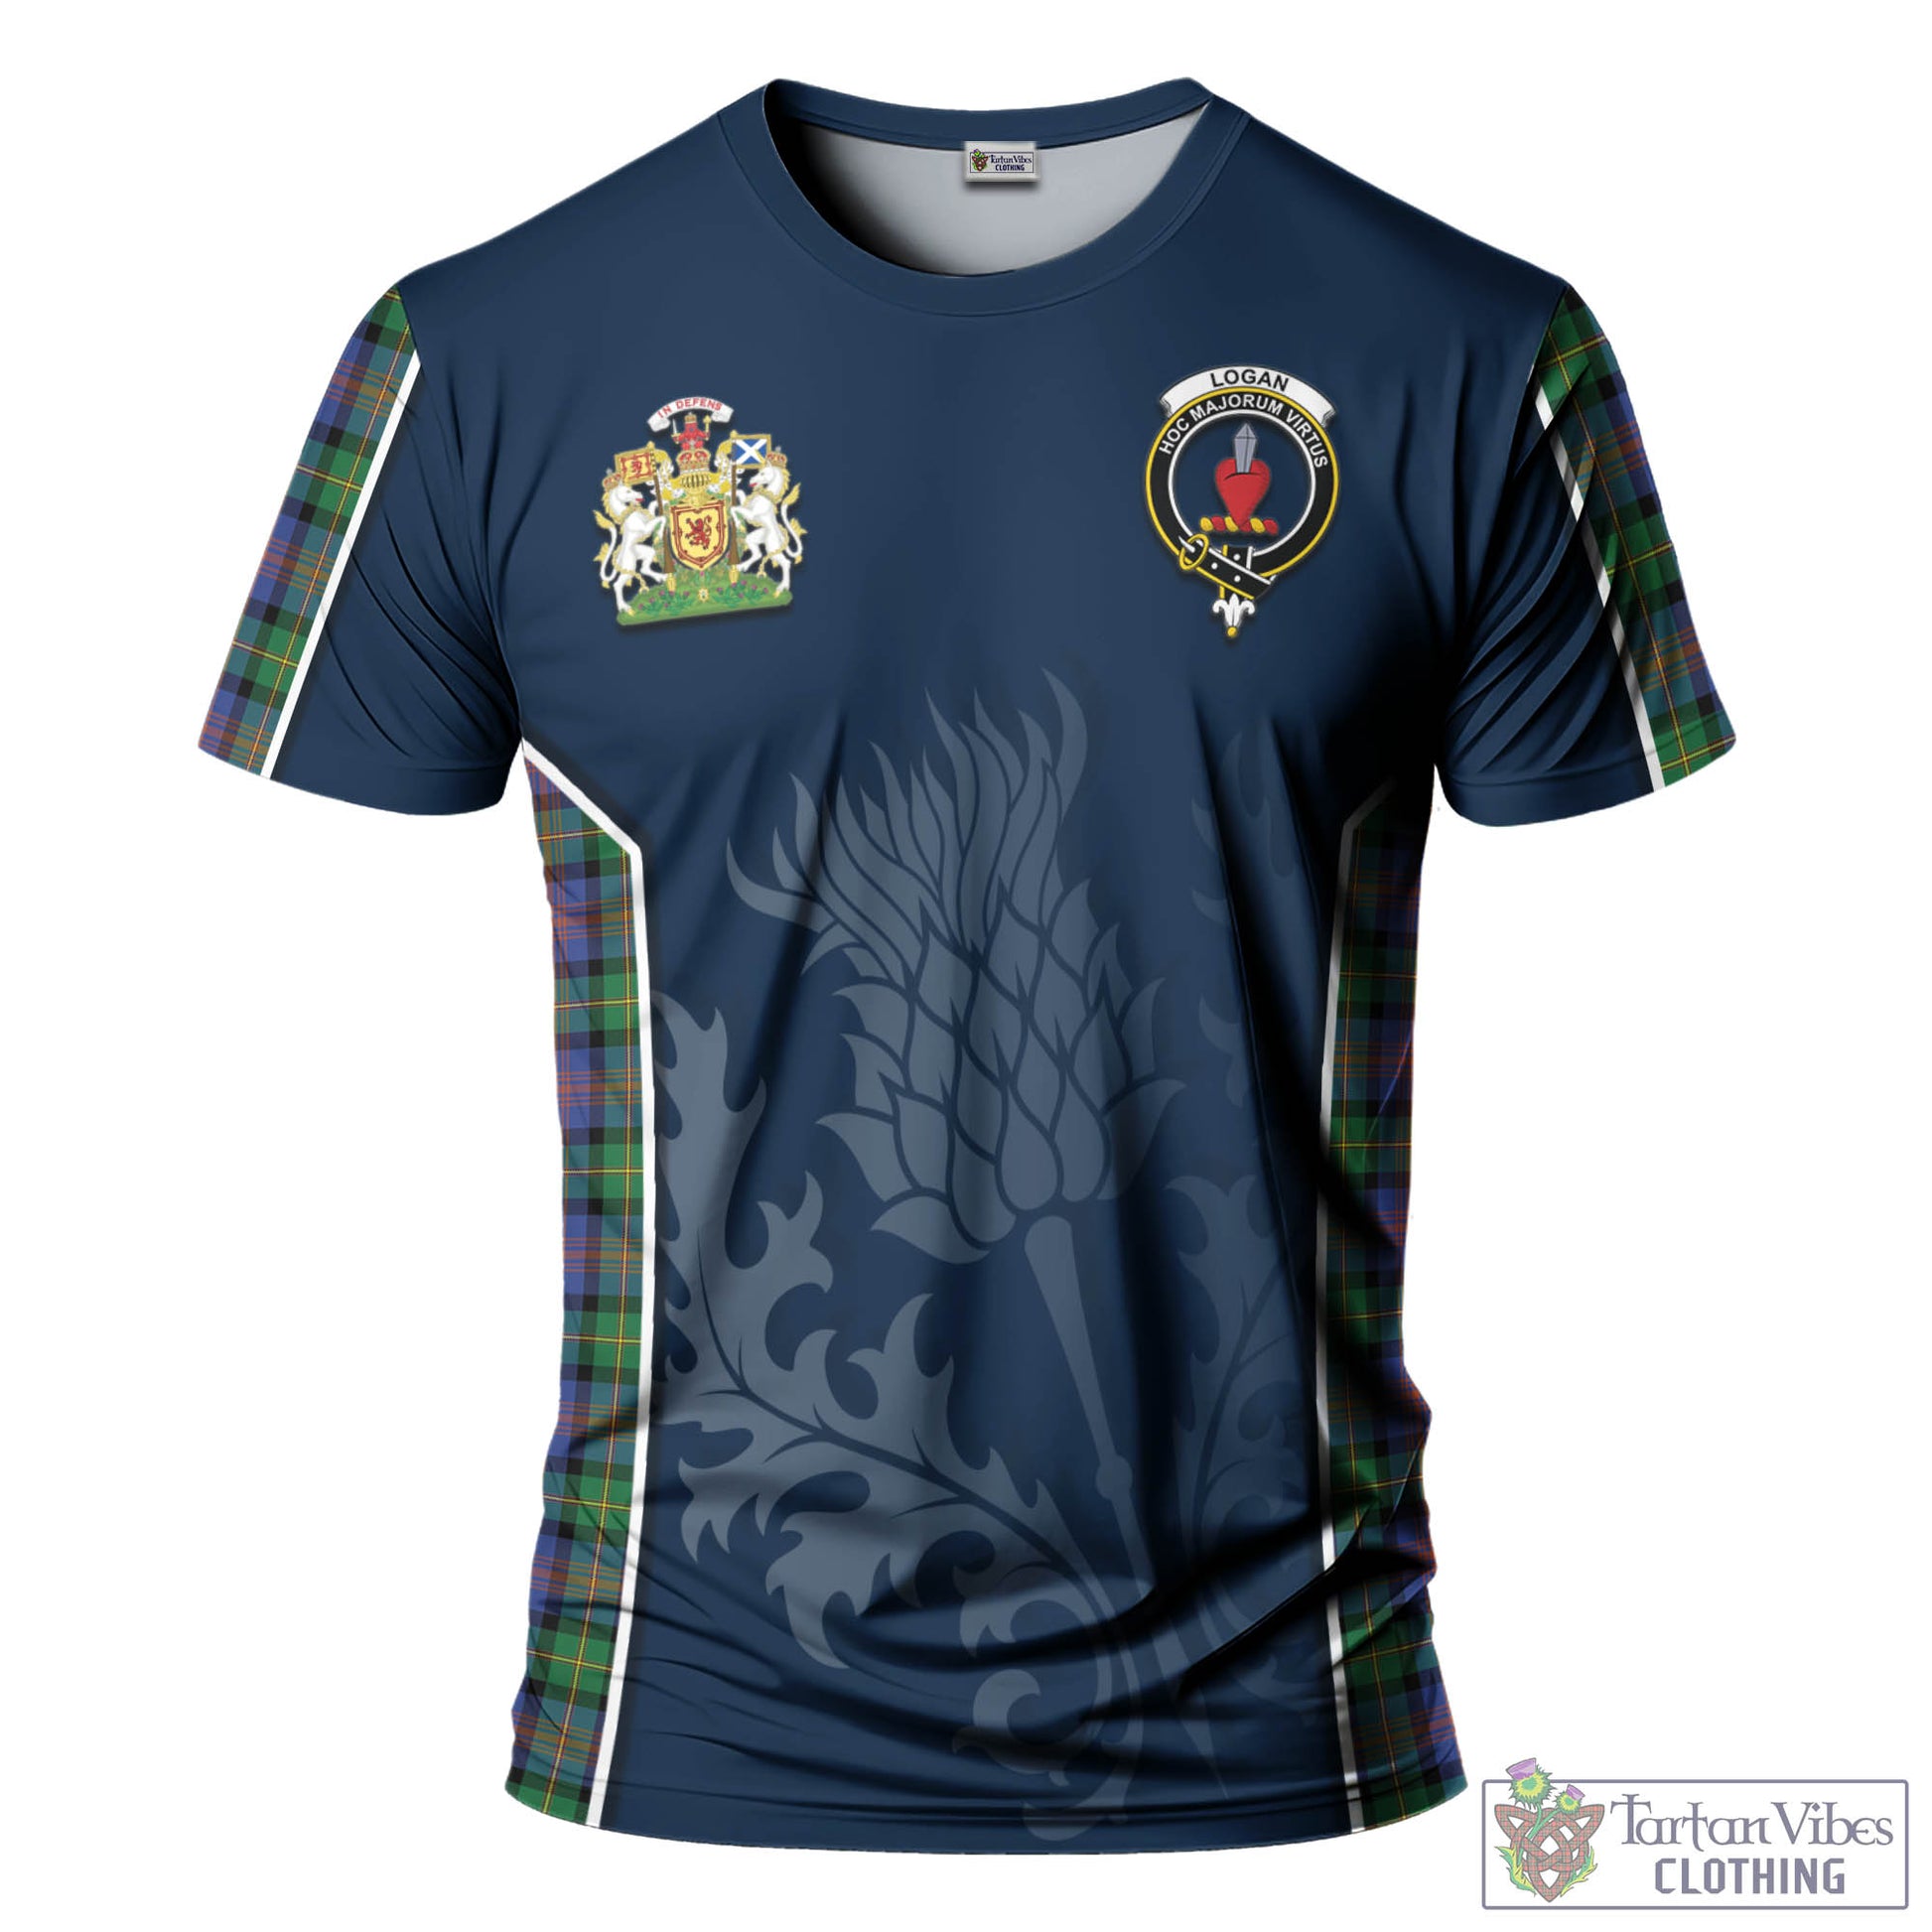 Tartan Vibes Clothing Logan Ancient Tartan T-Shirt with Family Crest and Scottish Thistle Vibes Sport Style